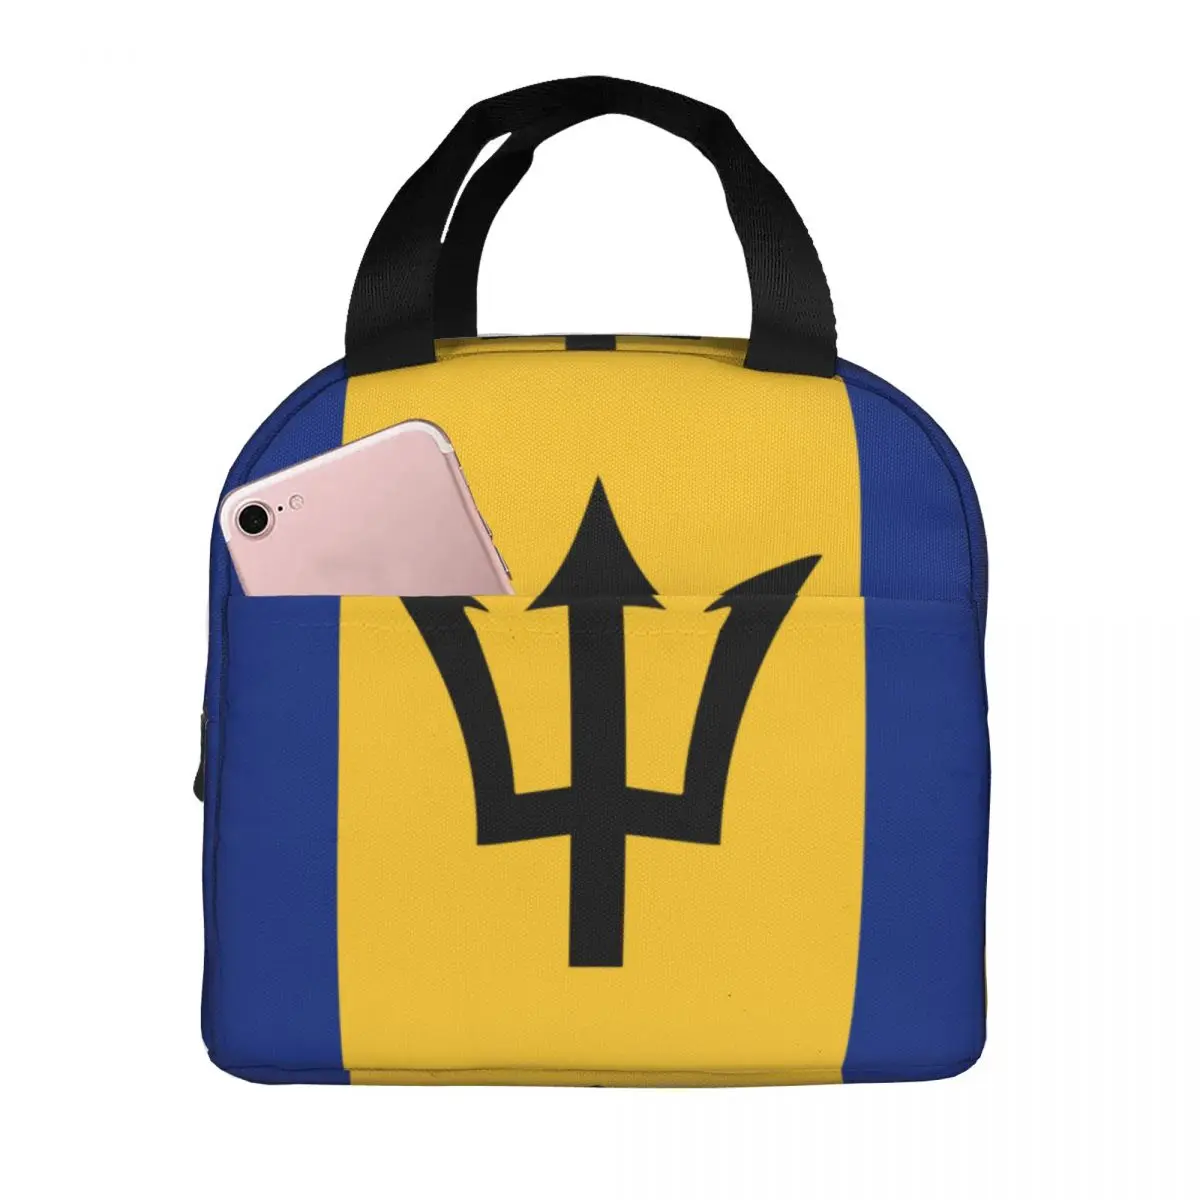 

Barbados Flag Lunch Food Box Bag Insulated Thermal Food Picnic Lunch Bag for Women kids Men Cooler Tote Bag